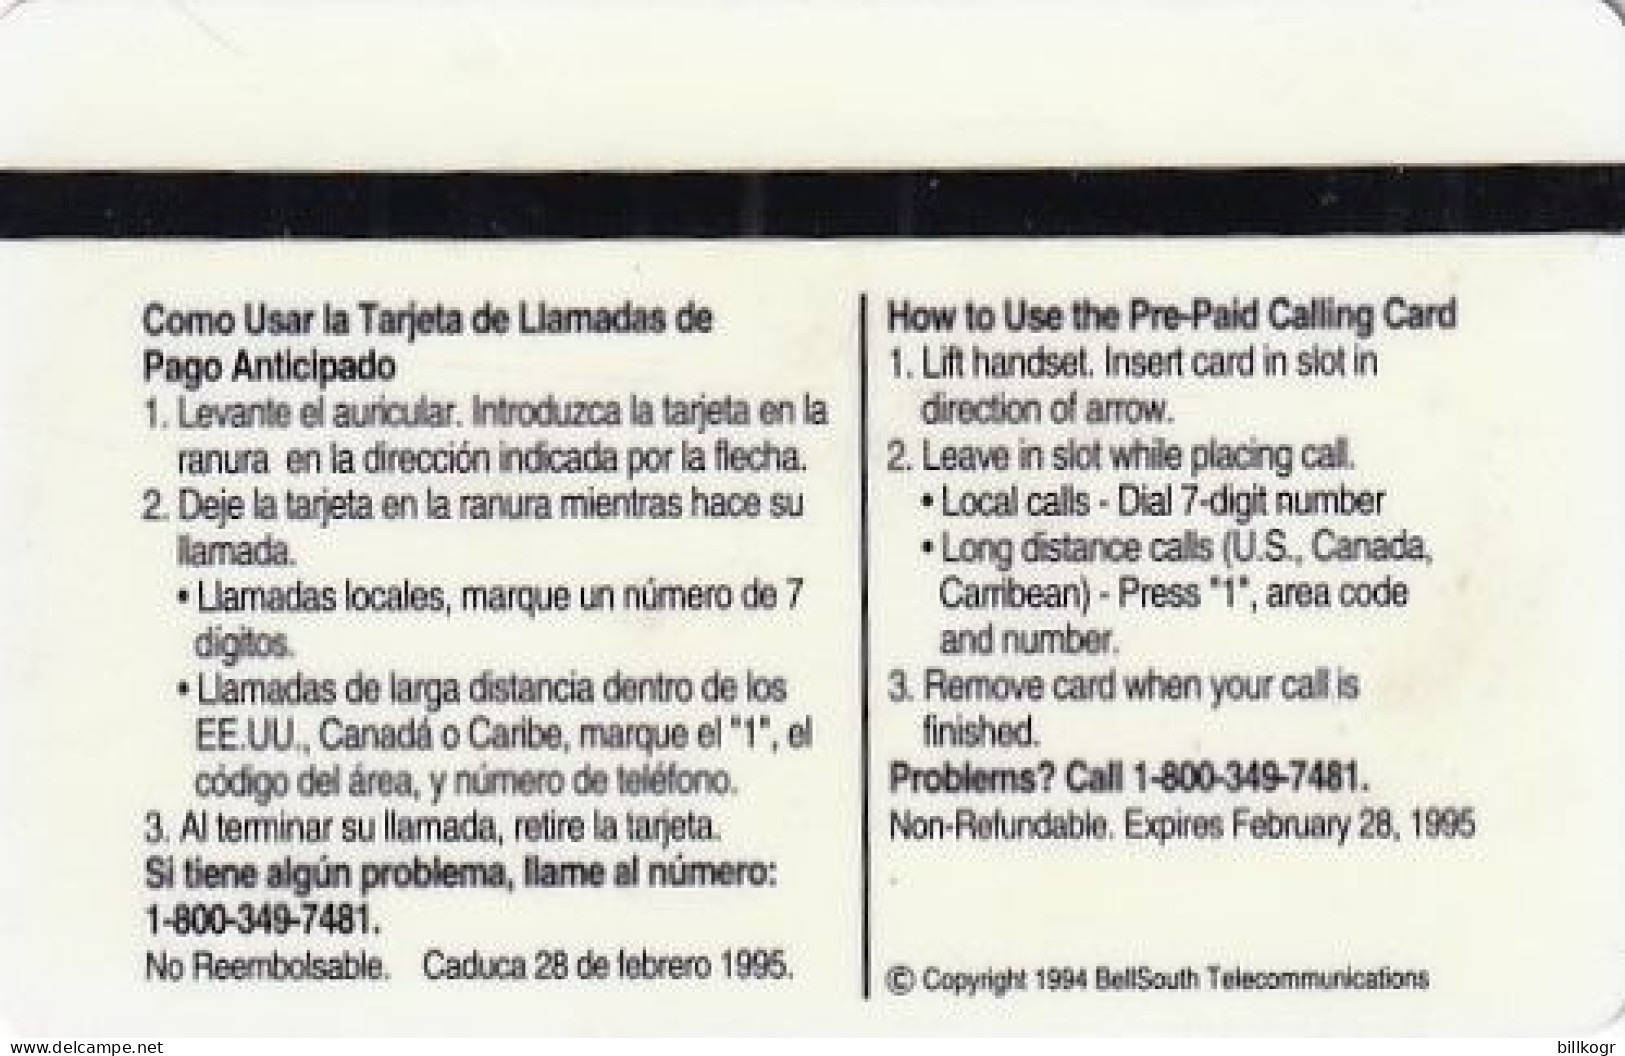 USA - Bellsouth Payphones, Bellsouth Trial Card, First Issue, Tirage 15000, 08/94, Mint - [3] Magnetic Cards